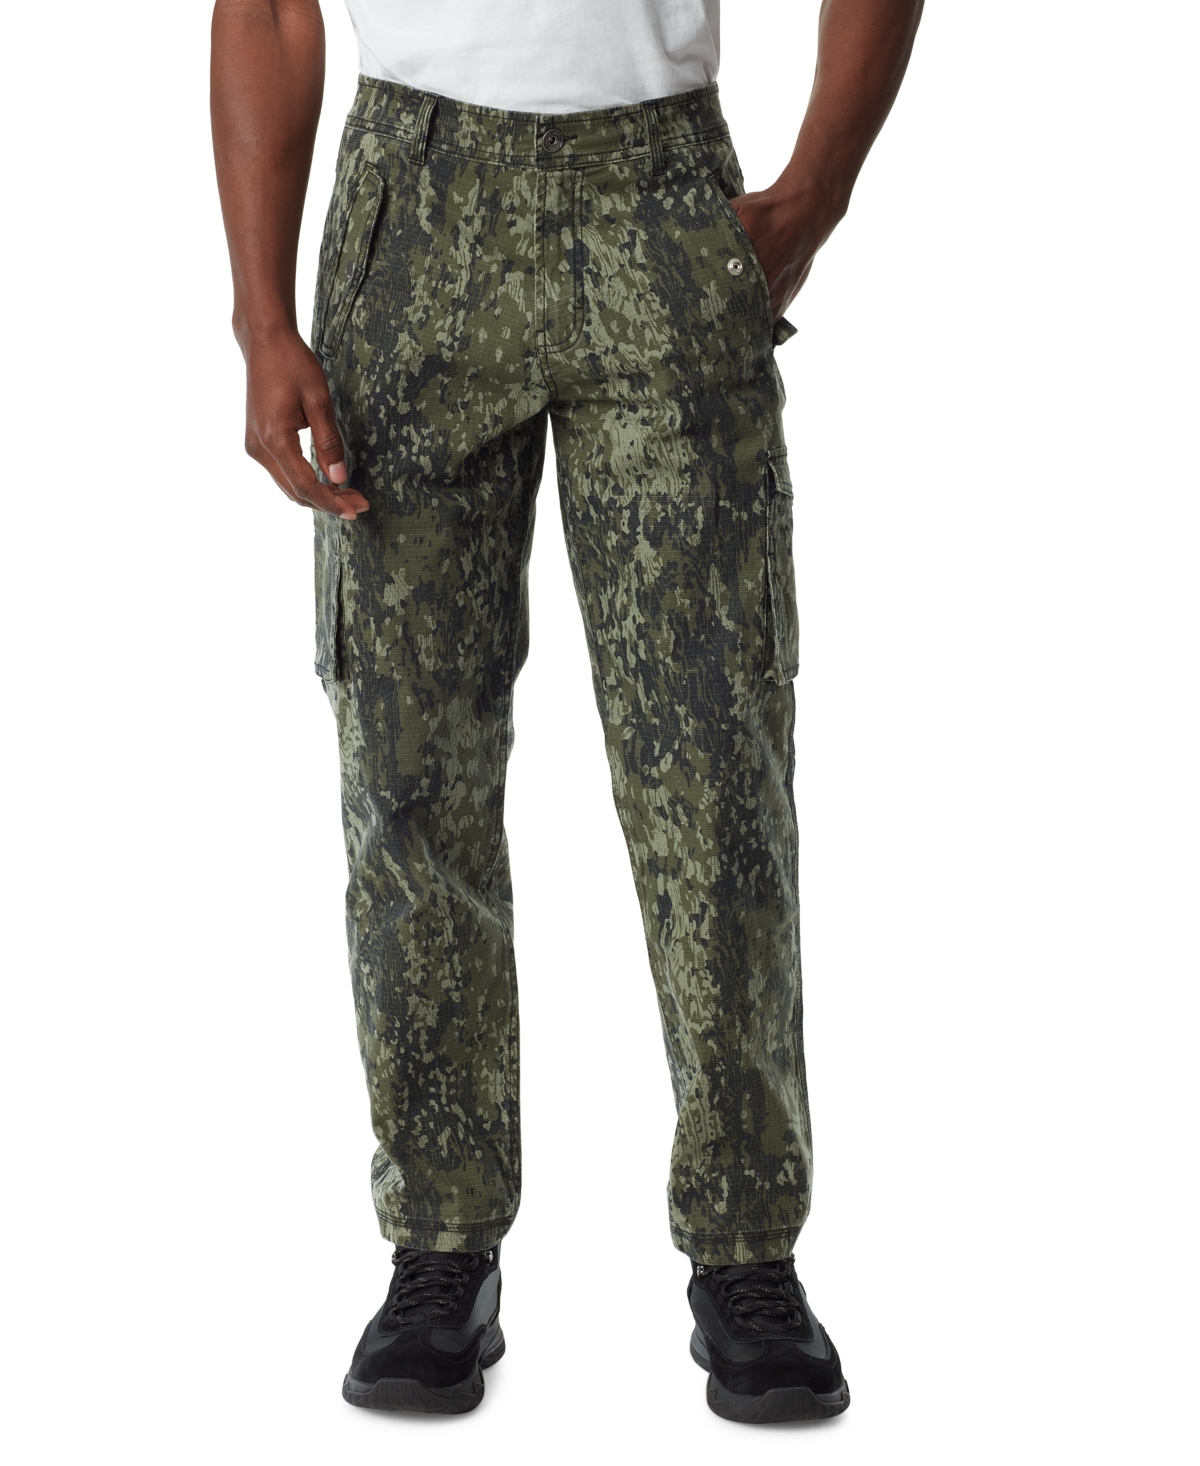 Men's Tapered-Fit Camo Force Cargo Pants - Green Bark Camo